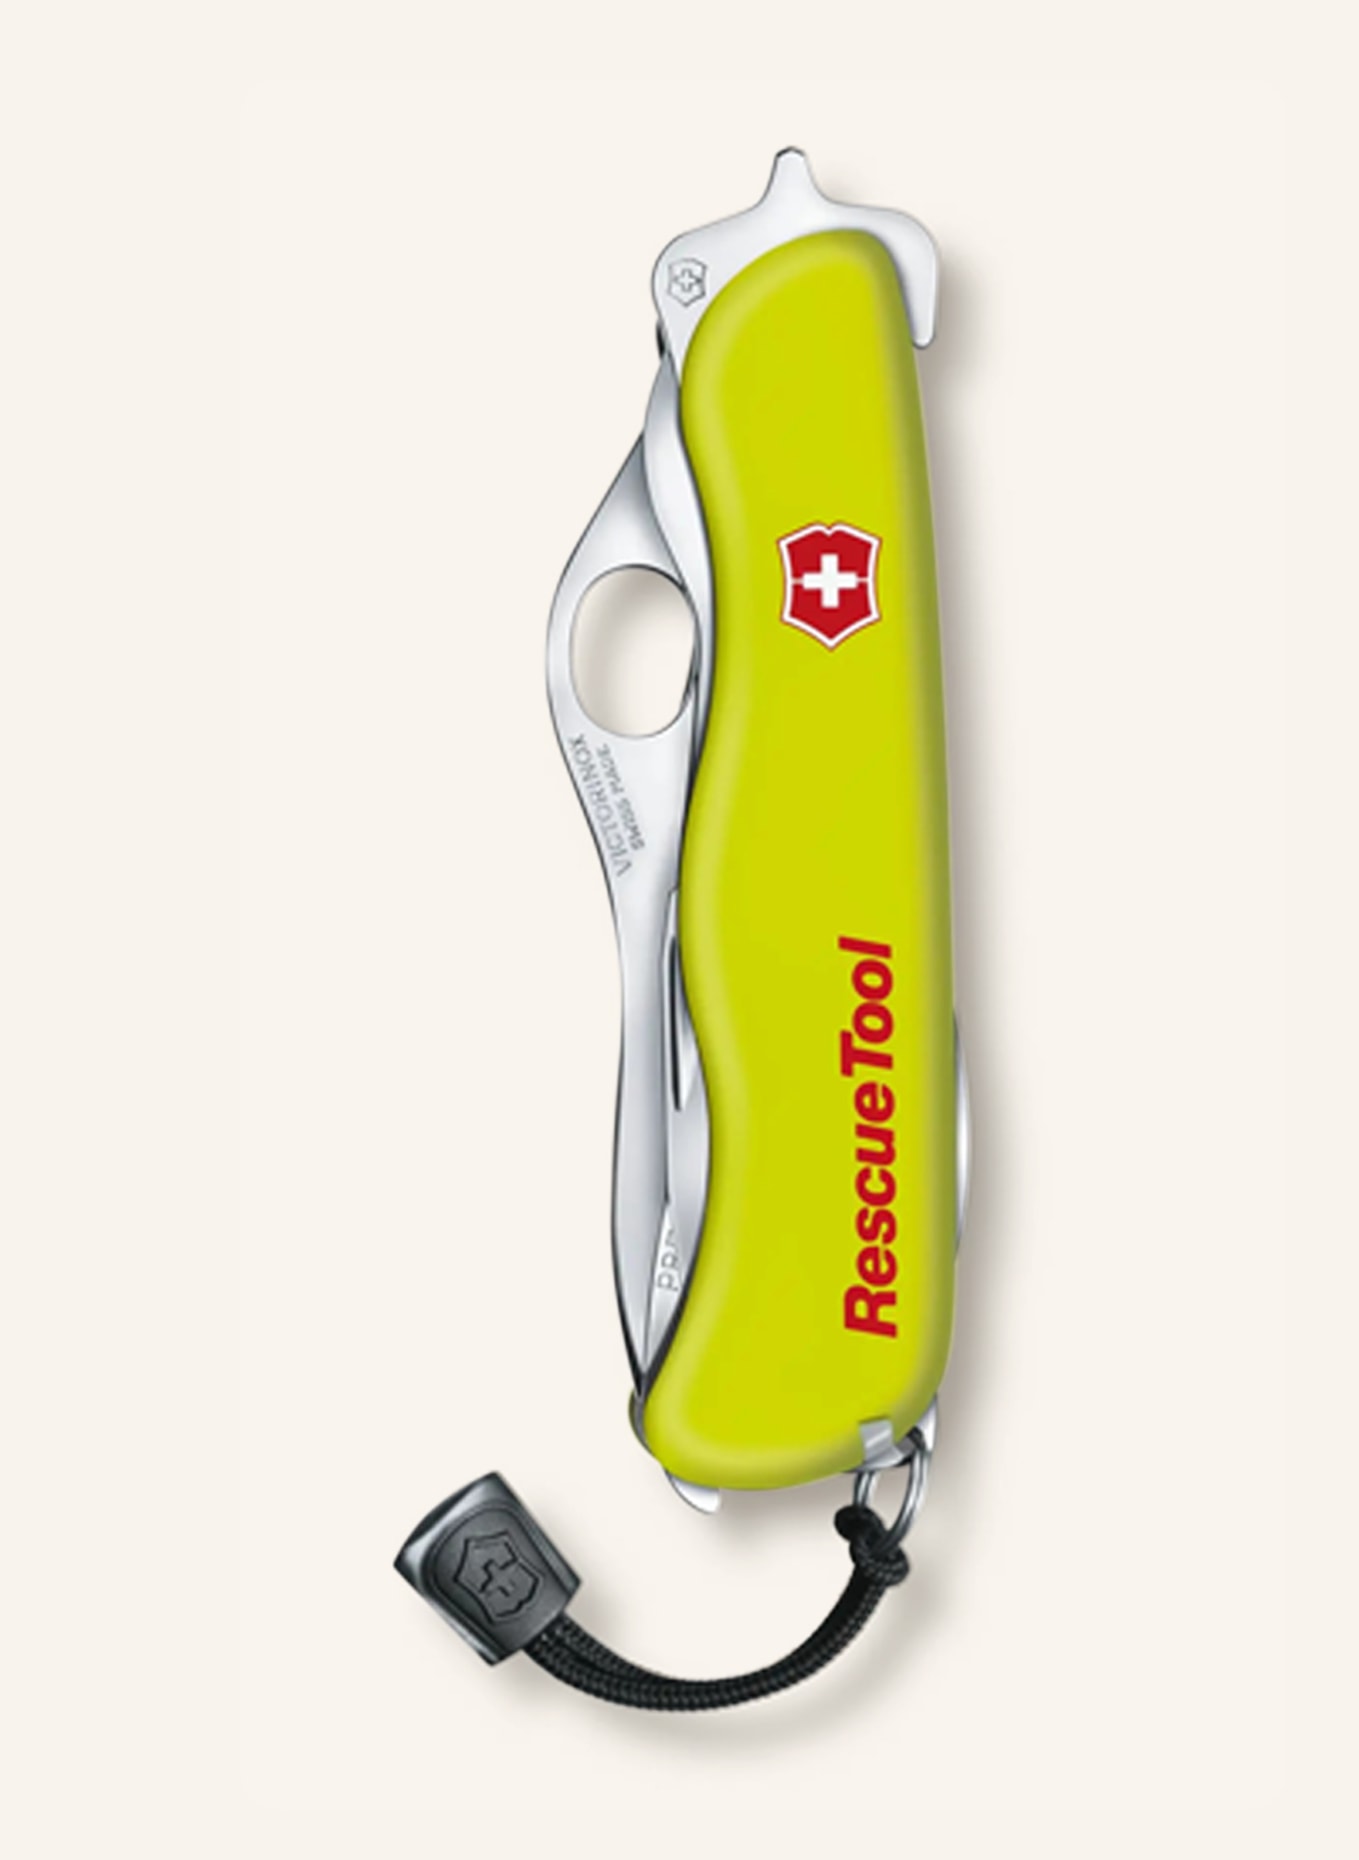 VICTORINOX Pocket knife RESCUE TOOL in yellow